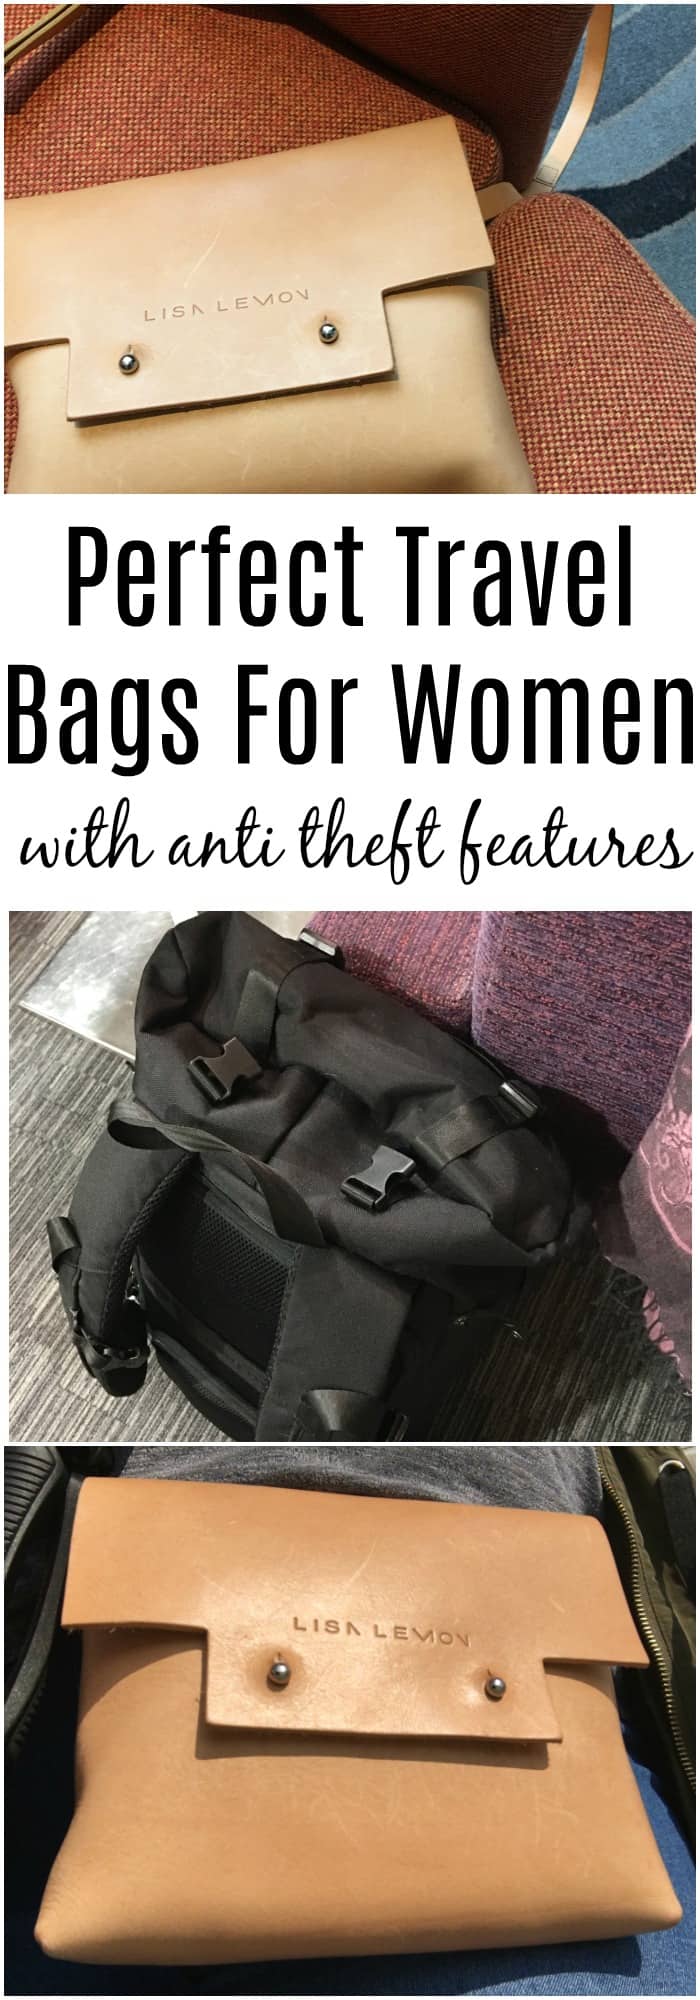 Perfect travel bags for women with anti theft features 